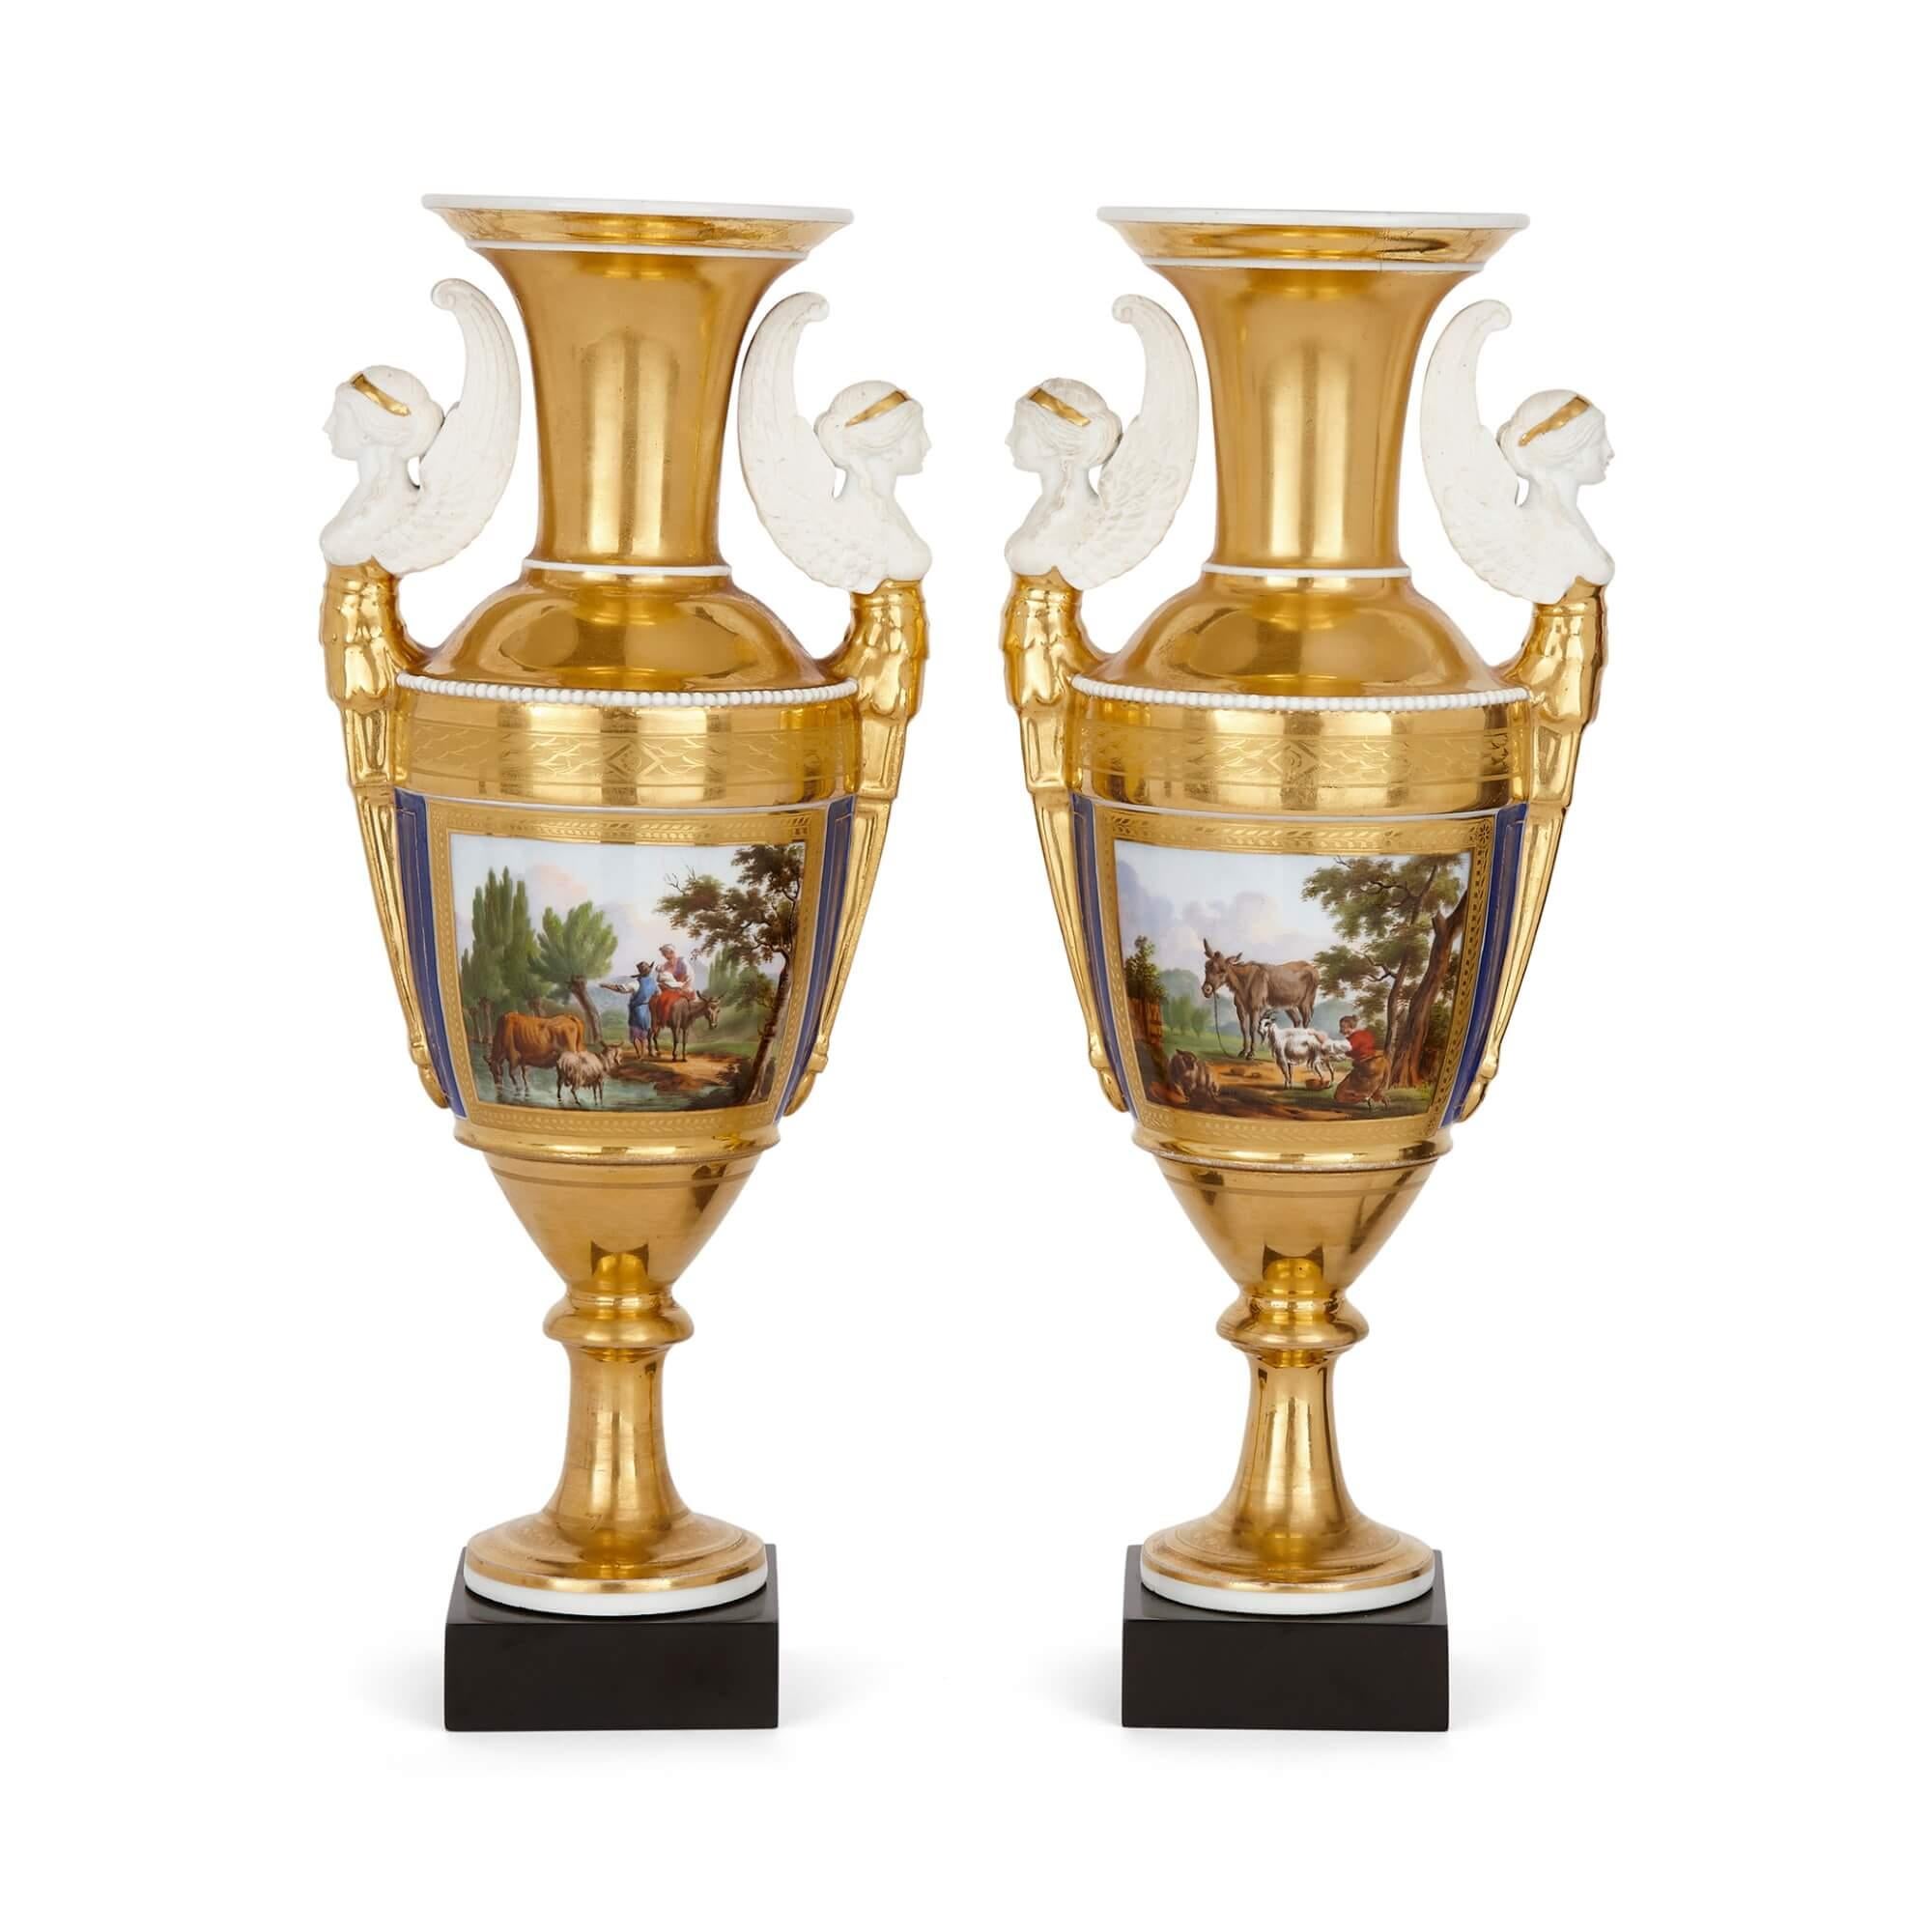 A pair of neoclassical Paris porcelain two-handled oviform vases
French, 19th century
Measures: Height 34.5cm, width 14cm, depth 11cm

This excellent pair of porcelain vases were made by Parisian craftsmen in the nineteenth century, in an